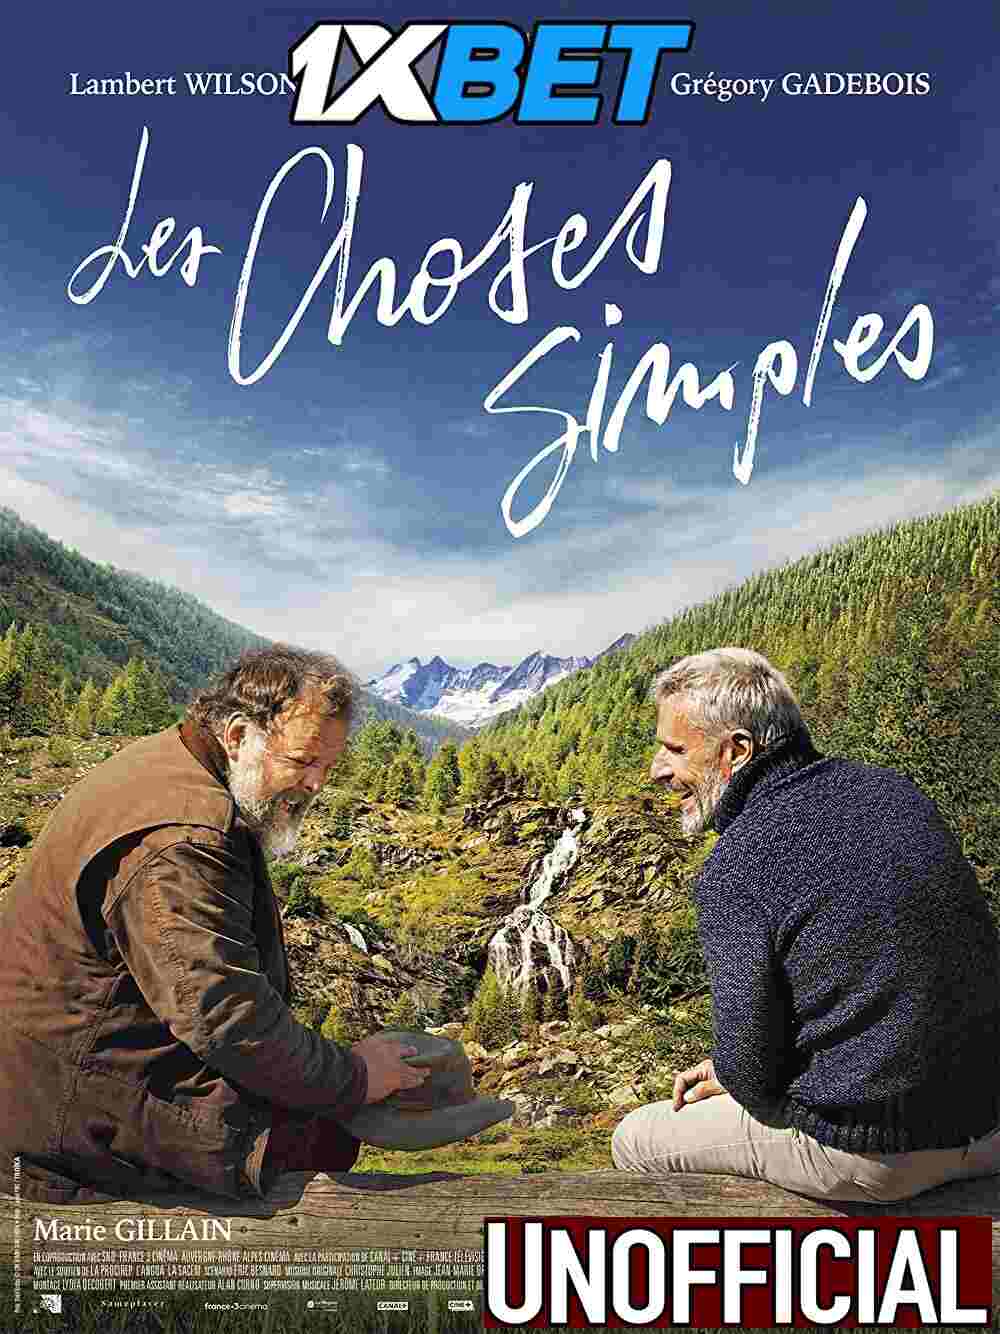 Download Les choses simples (2023) Quality 720p & 480p Dual Audio [Hindi Dubbed] Les choses simples Full Movie On KatMovieHD